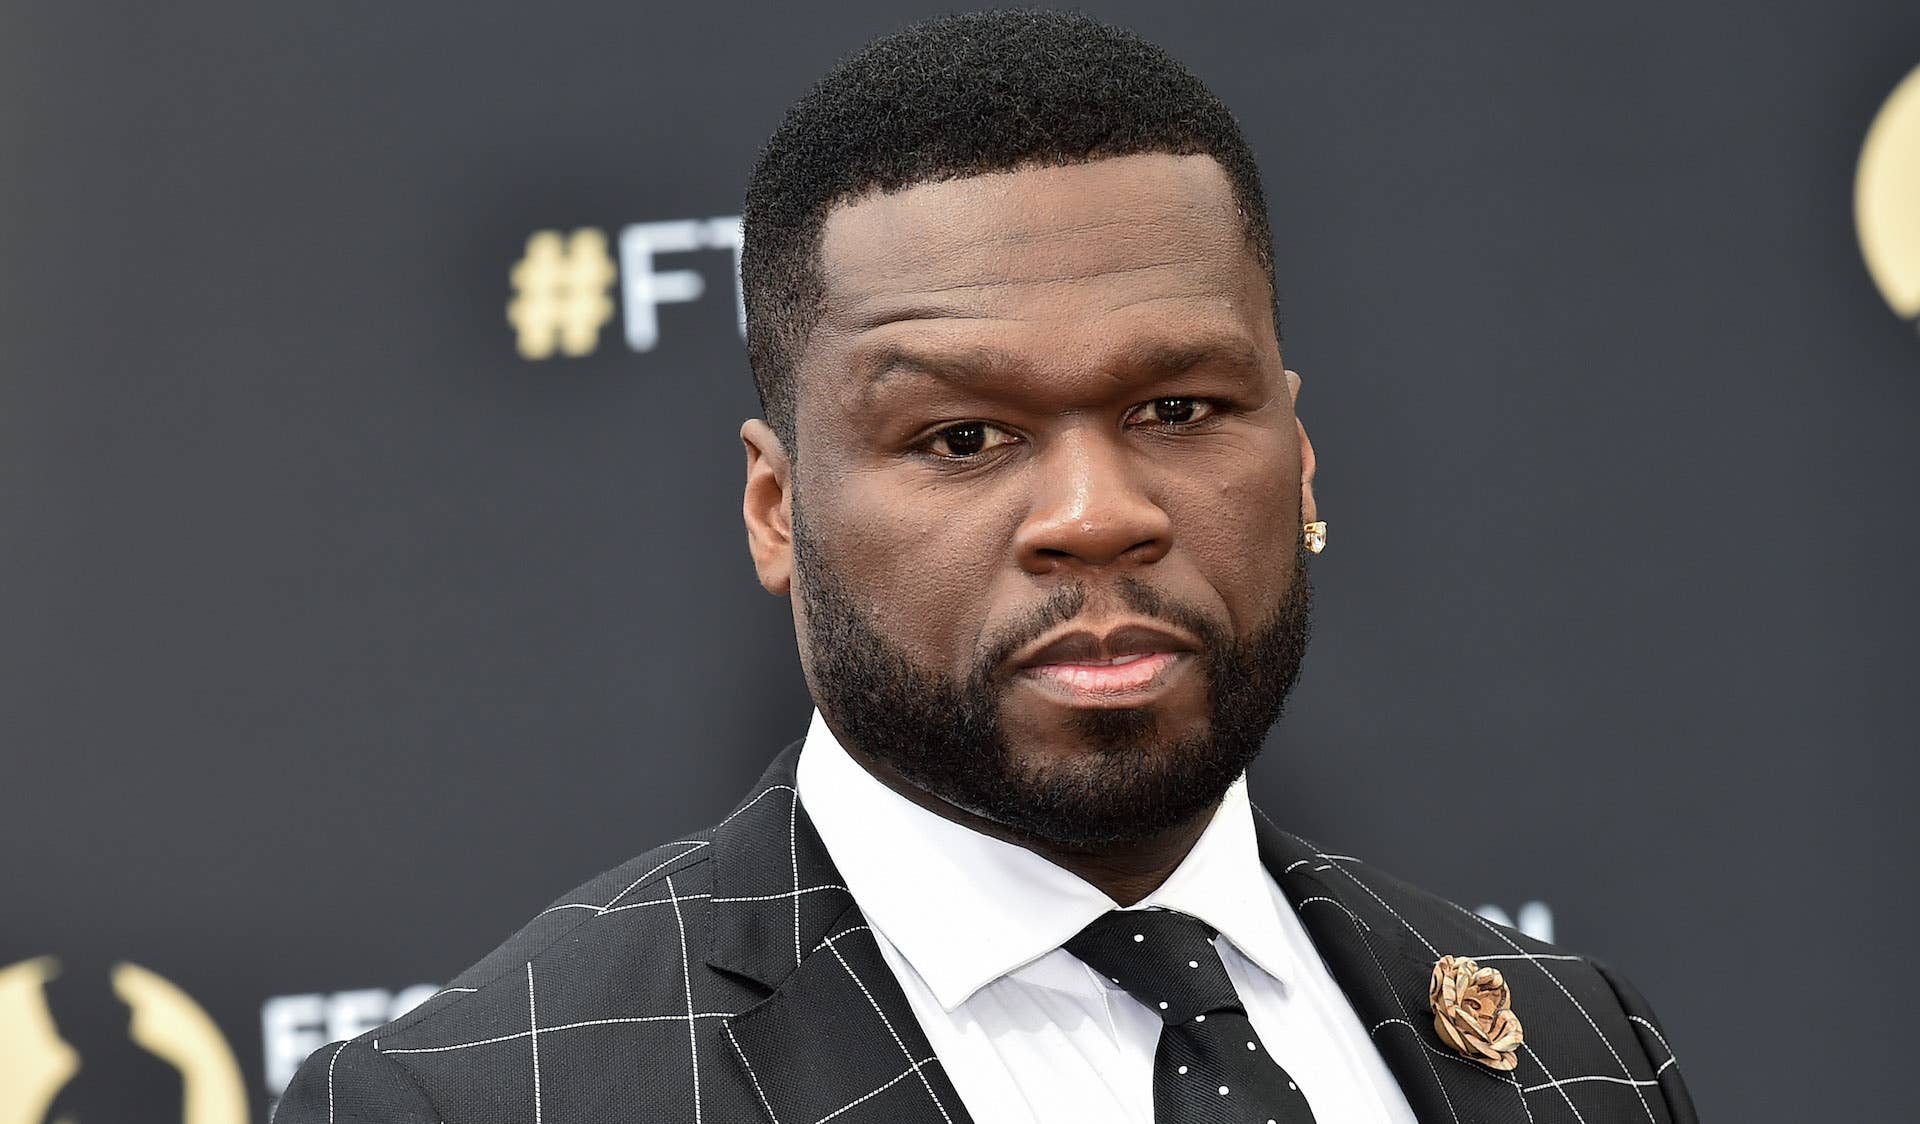 50 Cent attends premiere of Starz's 'Power'